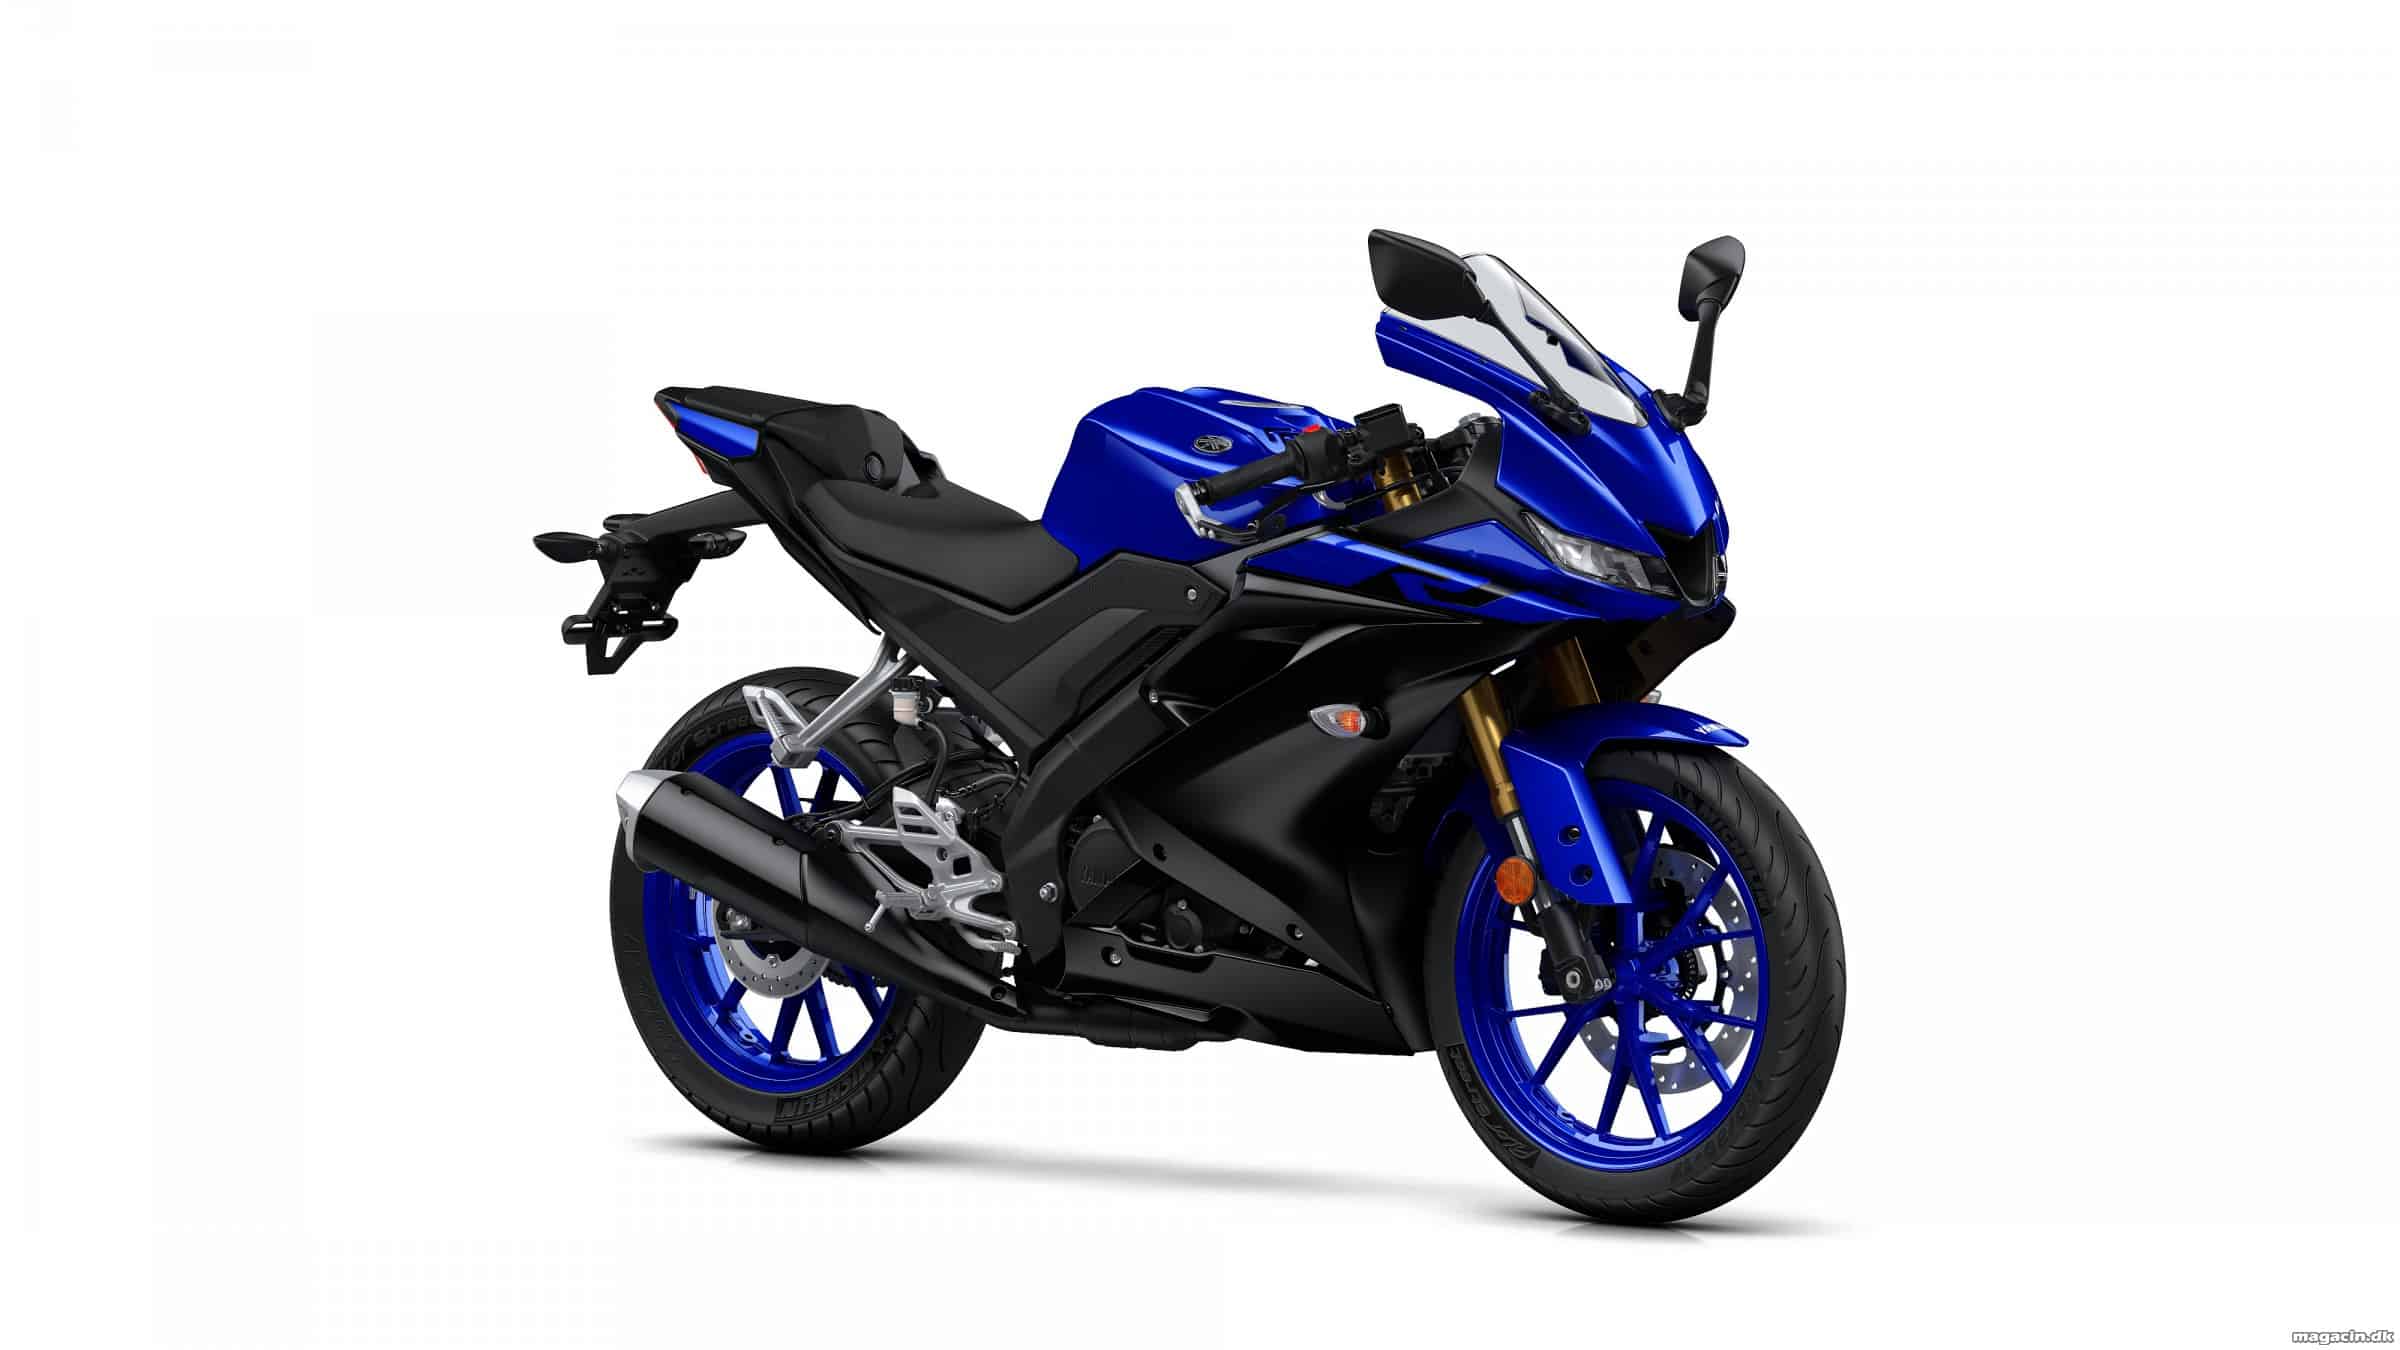 Højdepunkter for ny YZF-R125